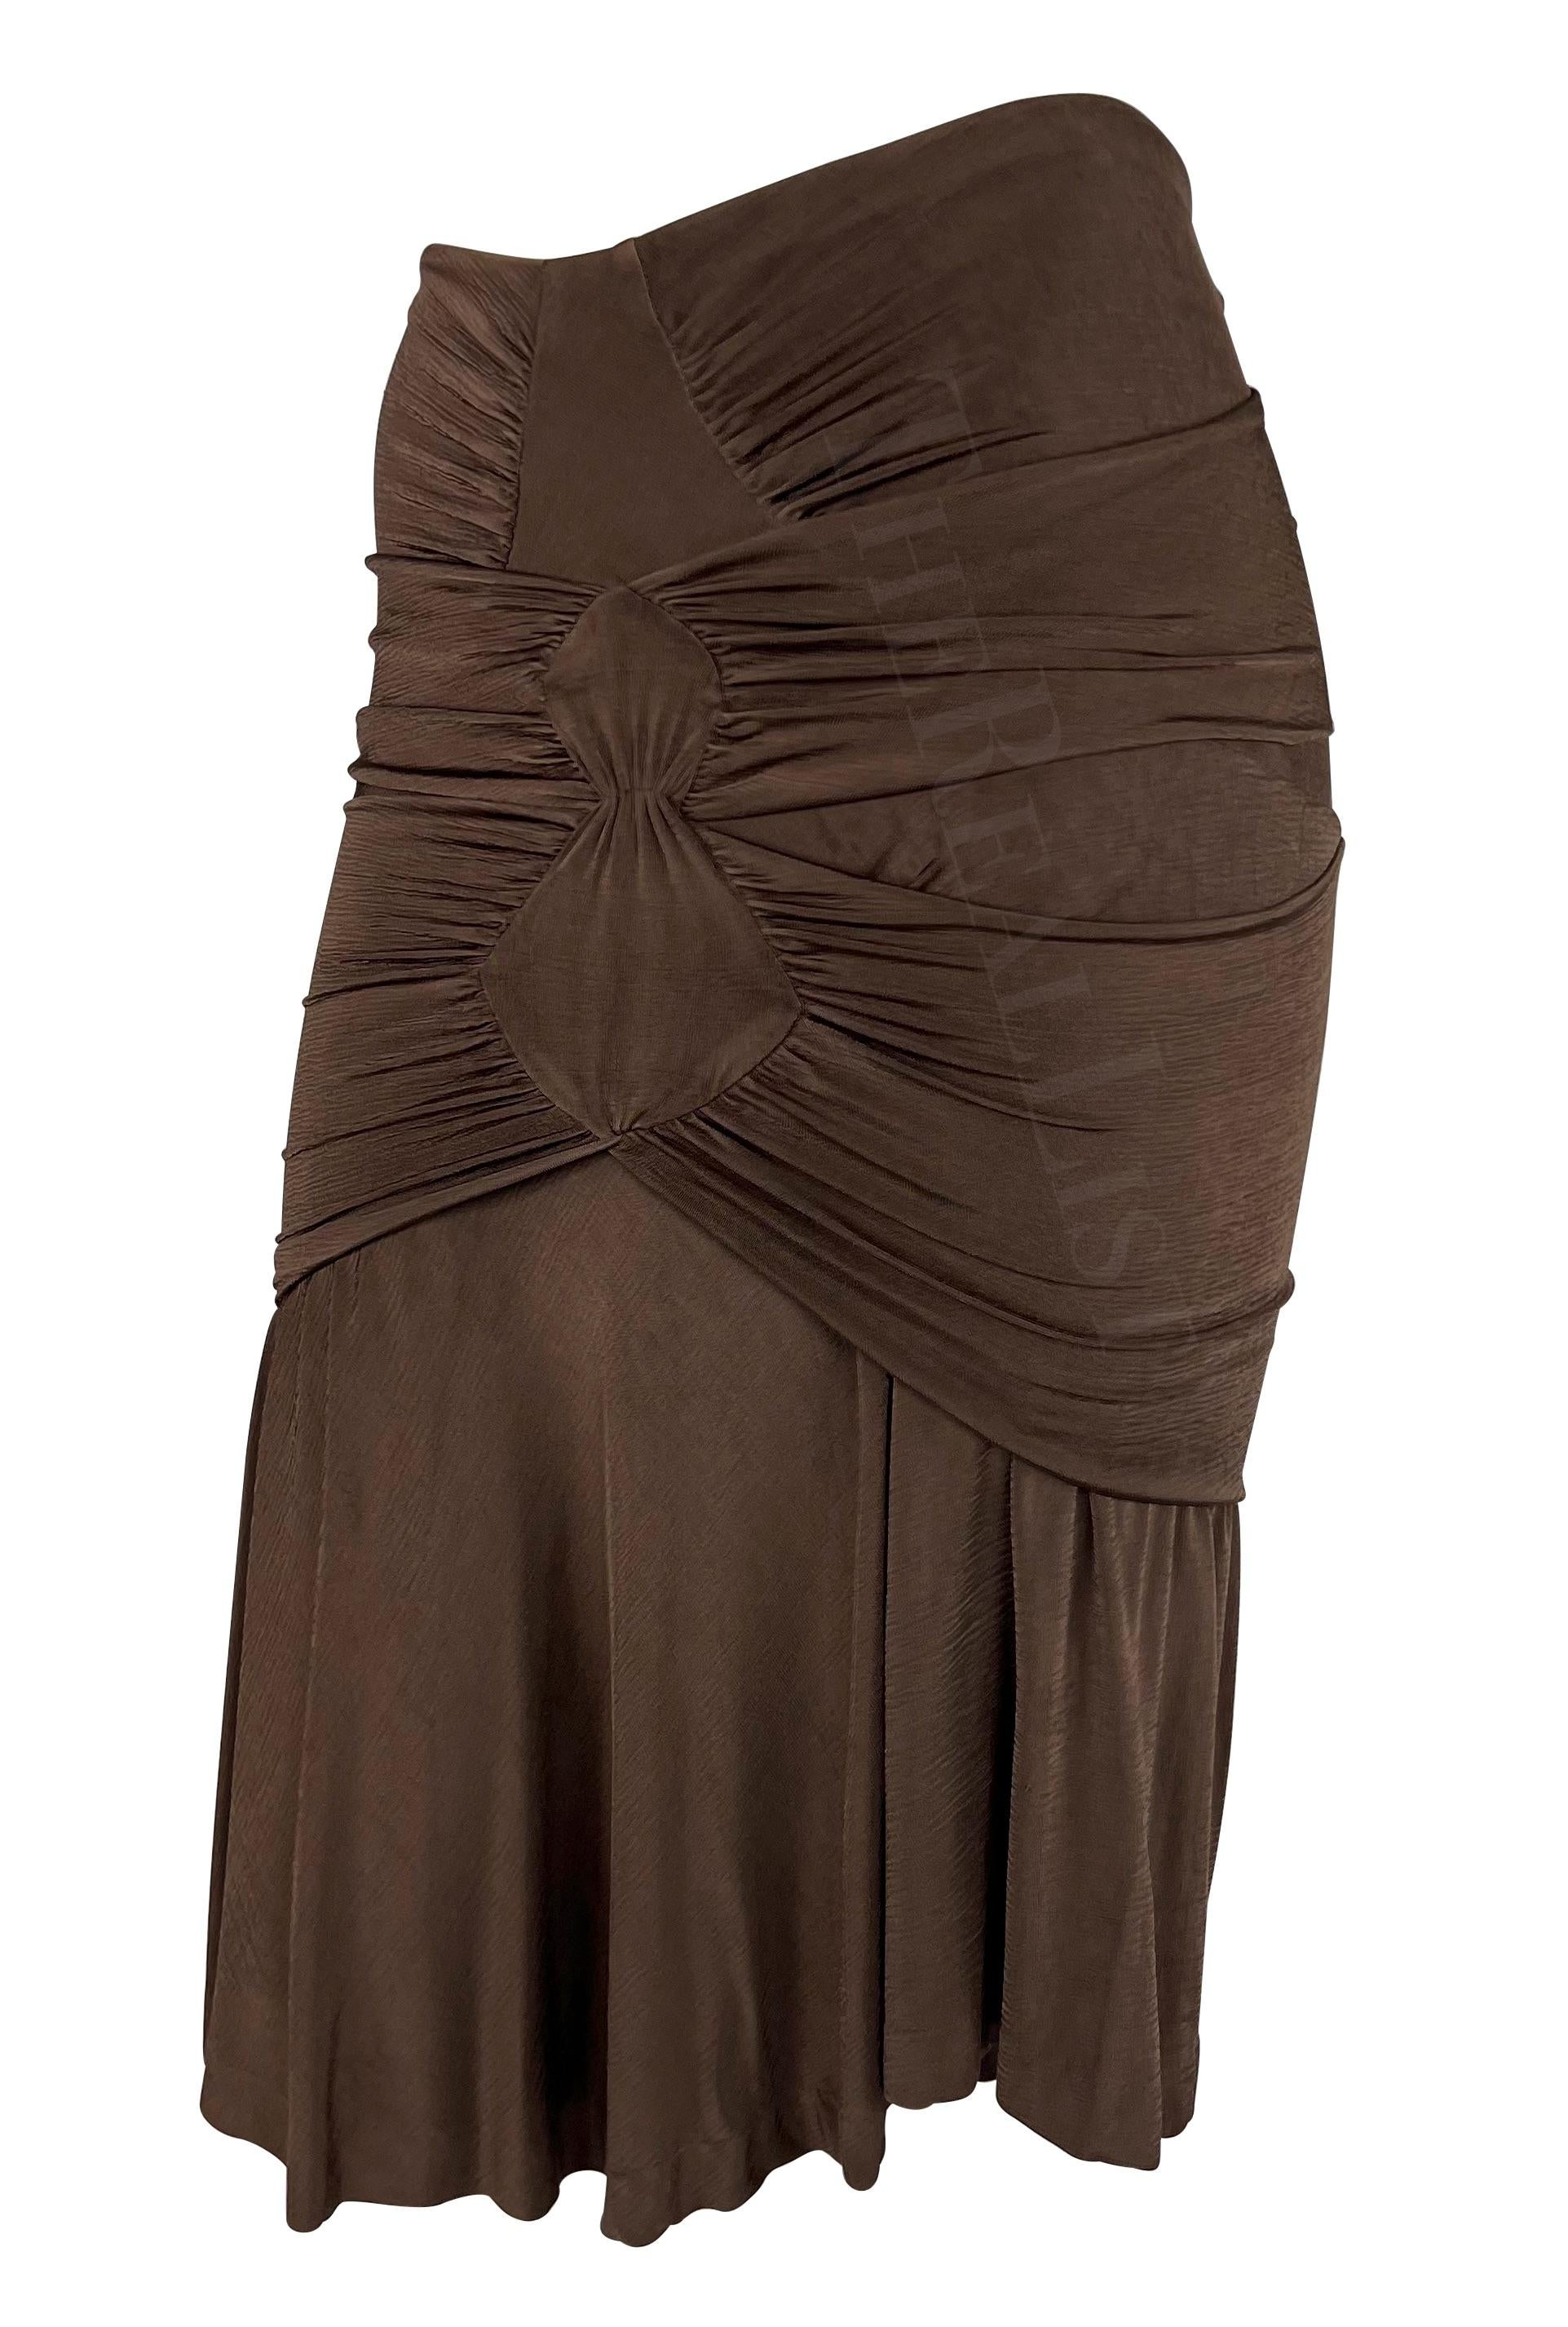 S/S 2003 Yves Saint Laurent by Tom Ford Runway Brown Ruched Slinky Skirt In Excellent Condition For Sale In West Hollywood, CA